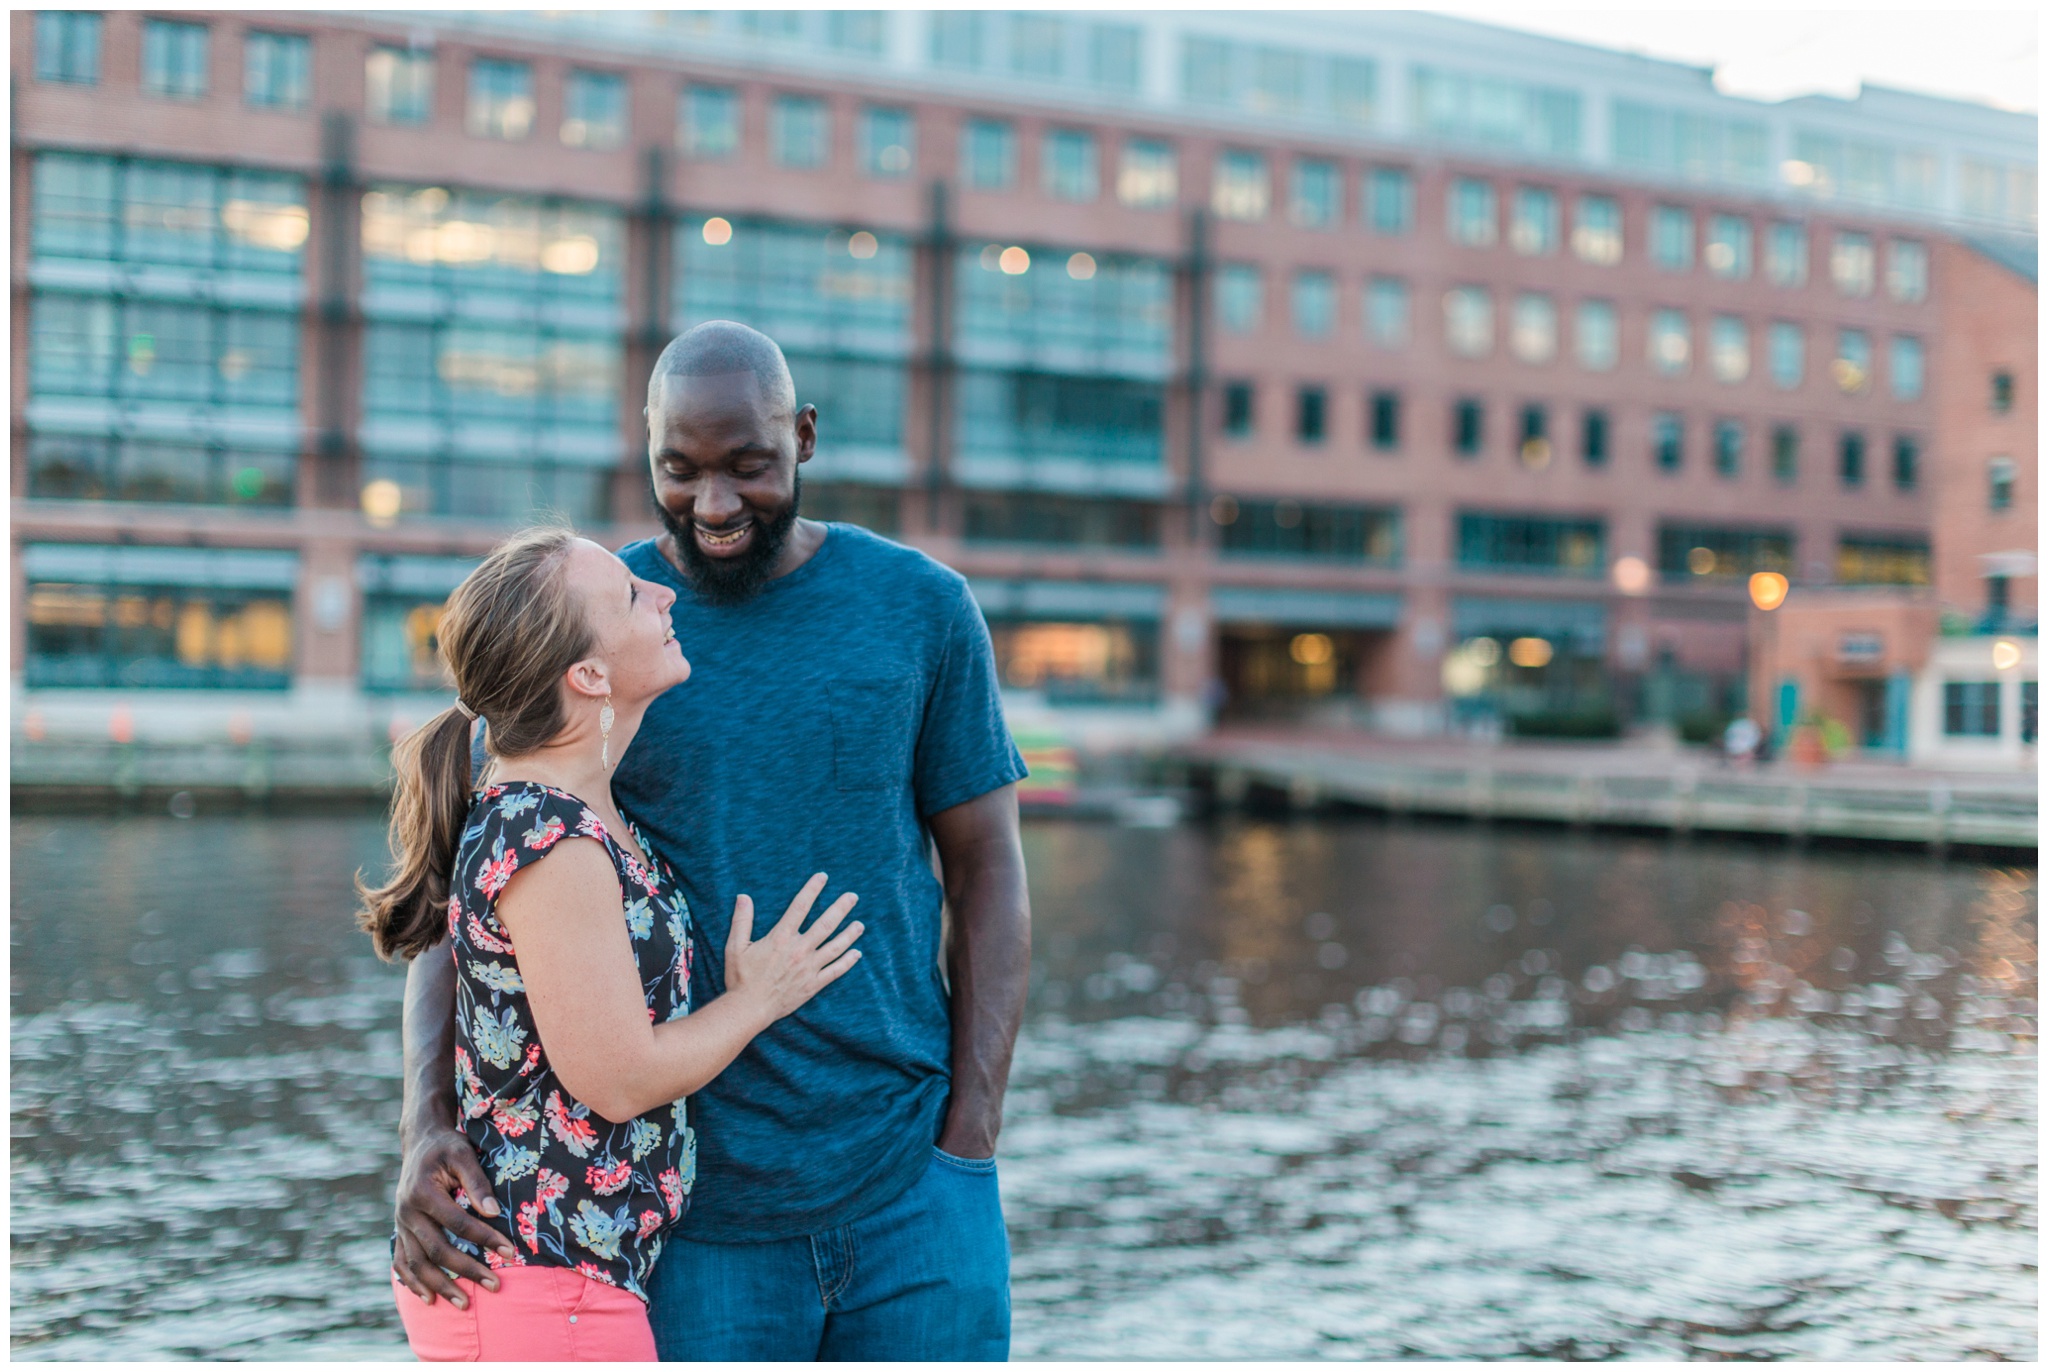 Fell's Point Maryland Engagement Photography